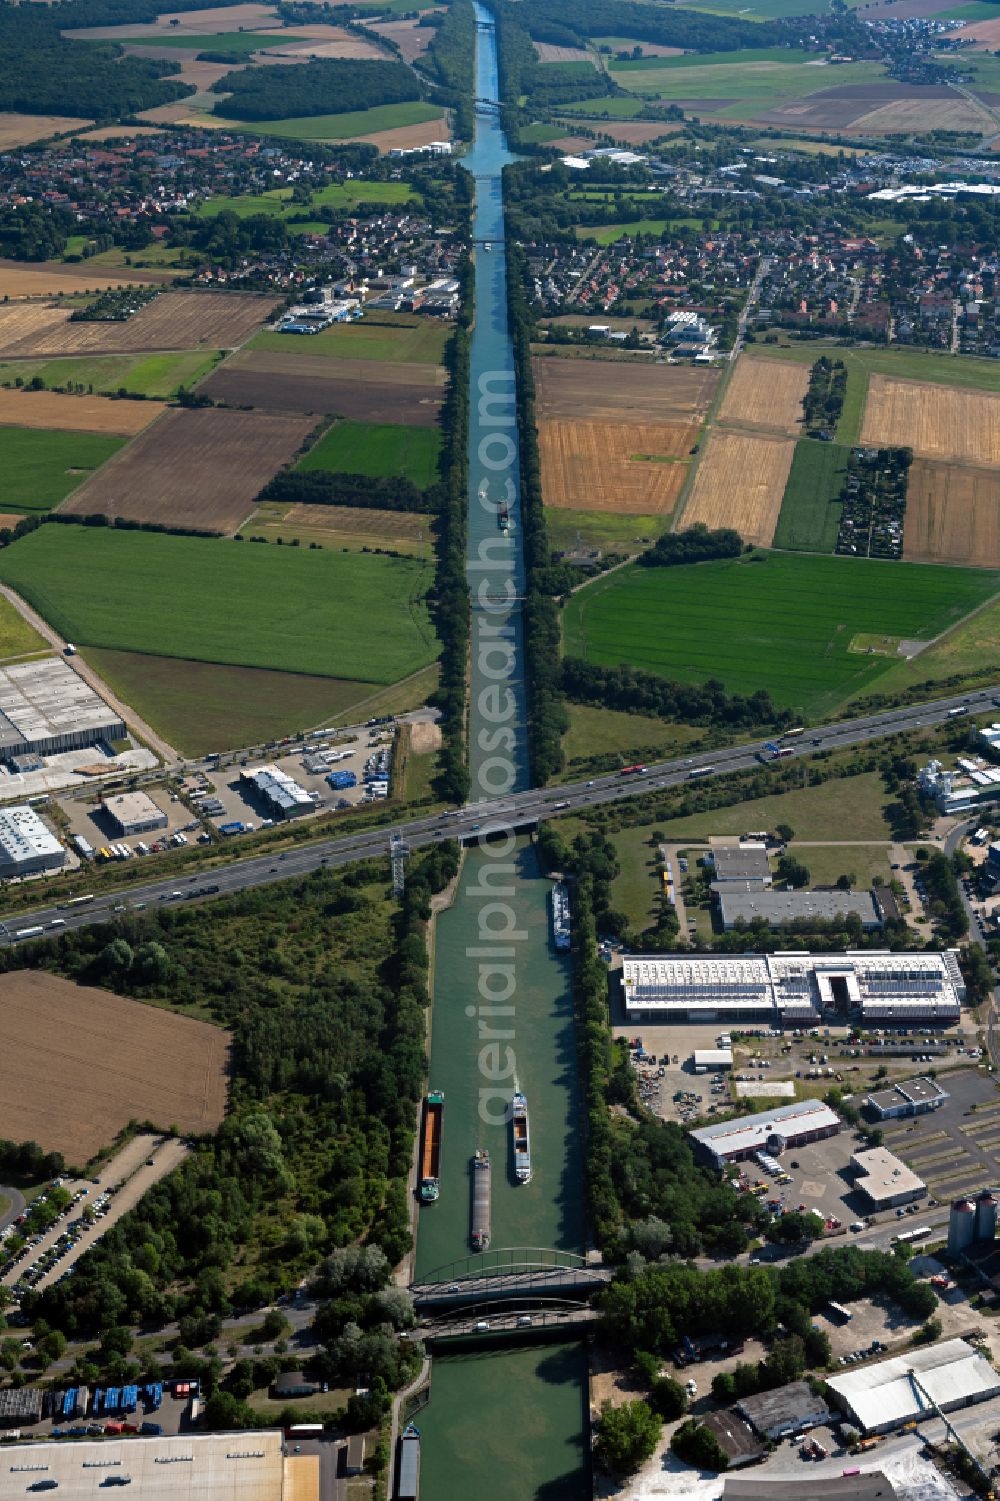 Aerial image Braunschweig - Ships and barge trains inland waterway transport in driving on the waterway of the river Mittellandkanal in Brunswick in the state Lower Saxony, Germany